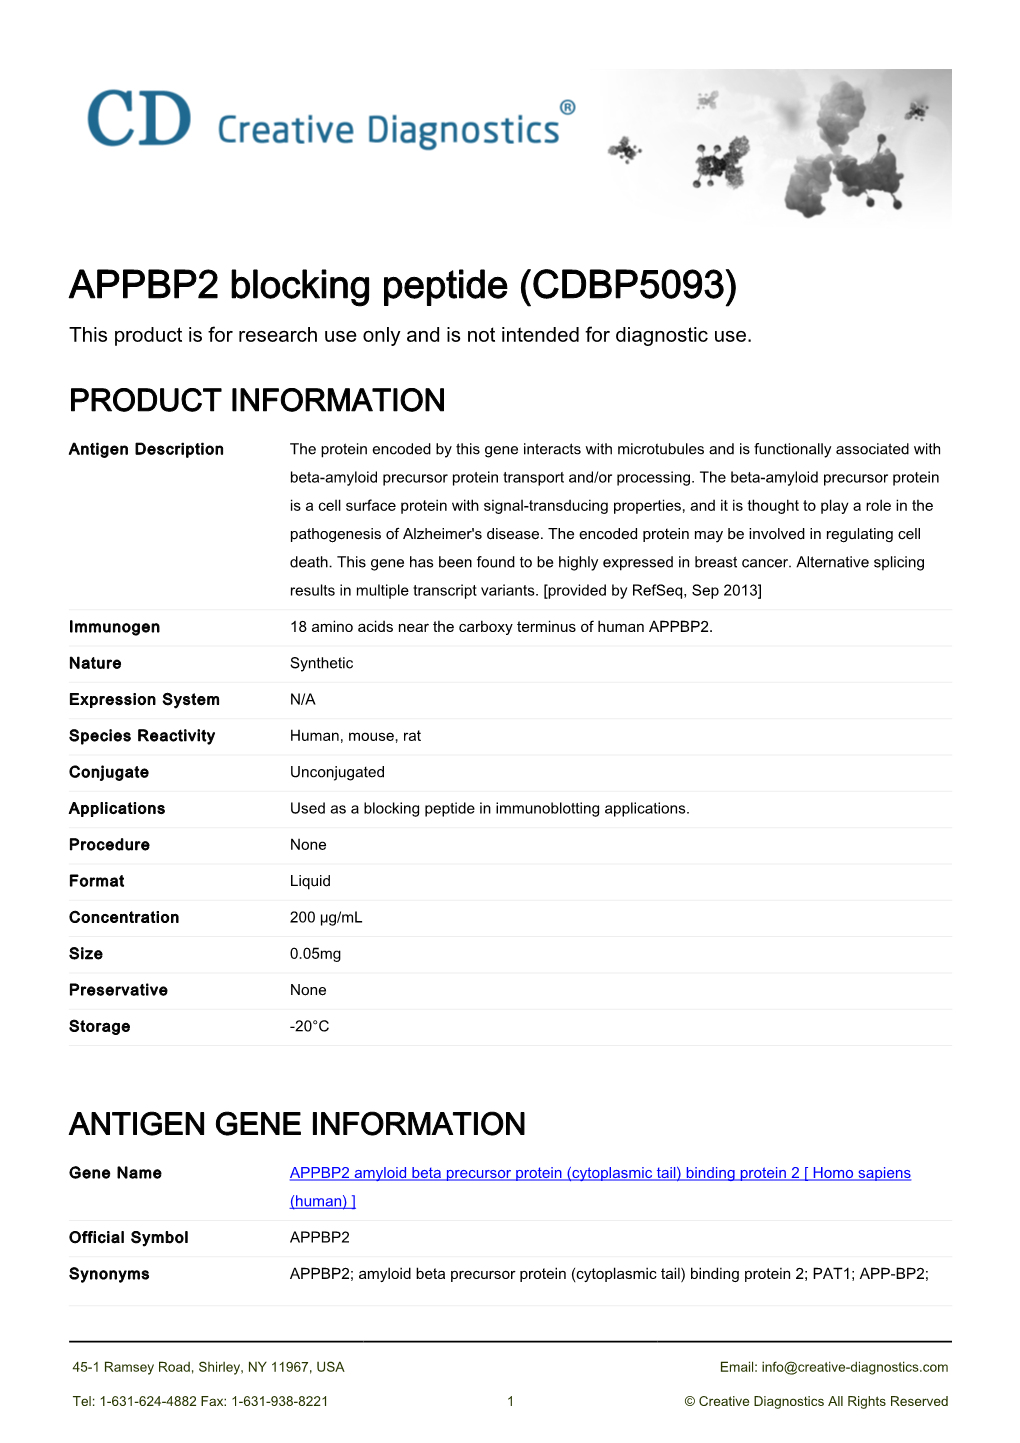 APPBP2 Blocking Peptide (CDBP5093) This Product Is for Research Use Only and Is Not Intended for Diagnostic Use